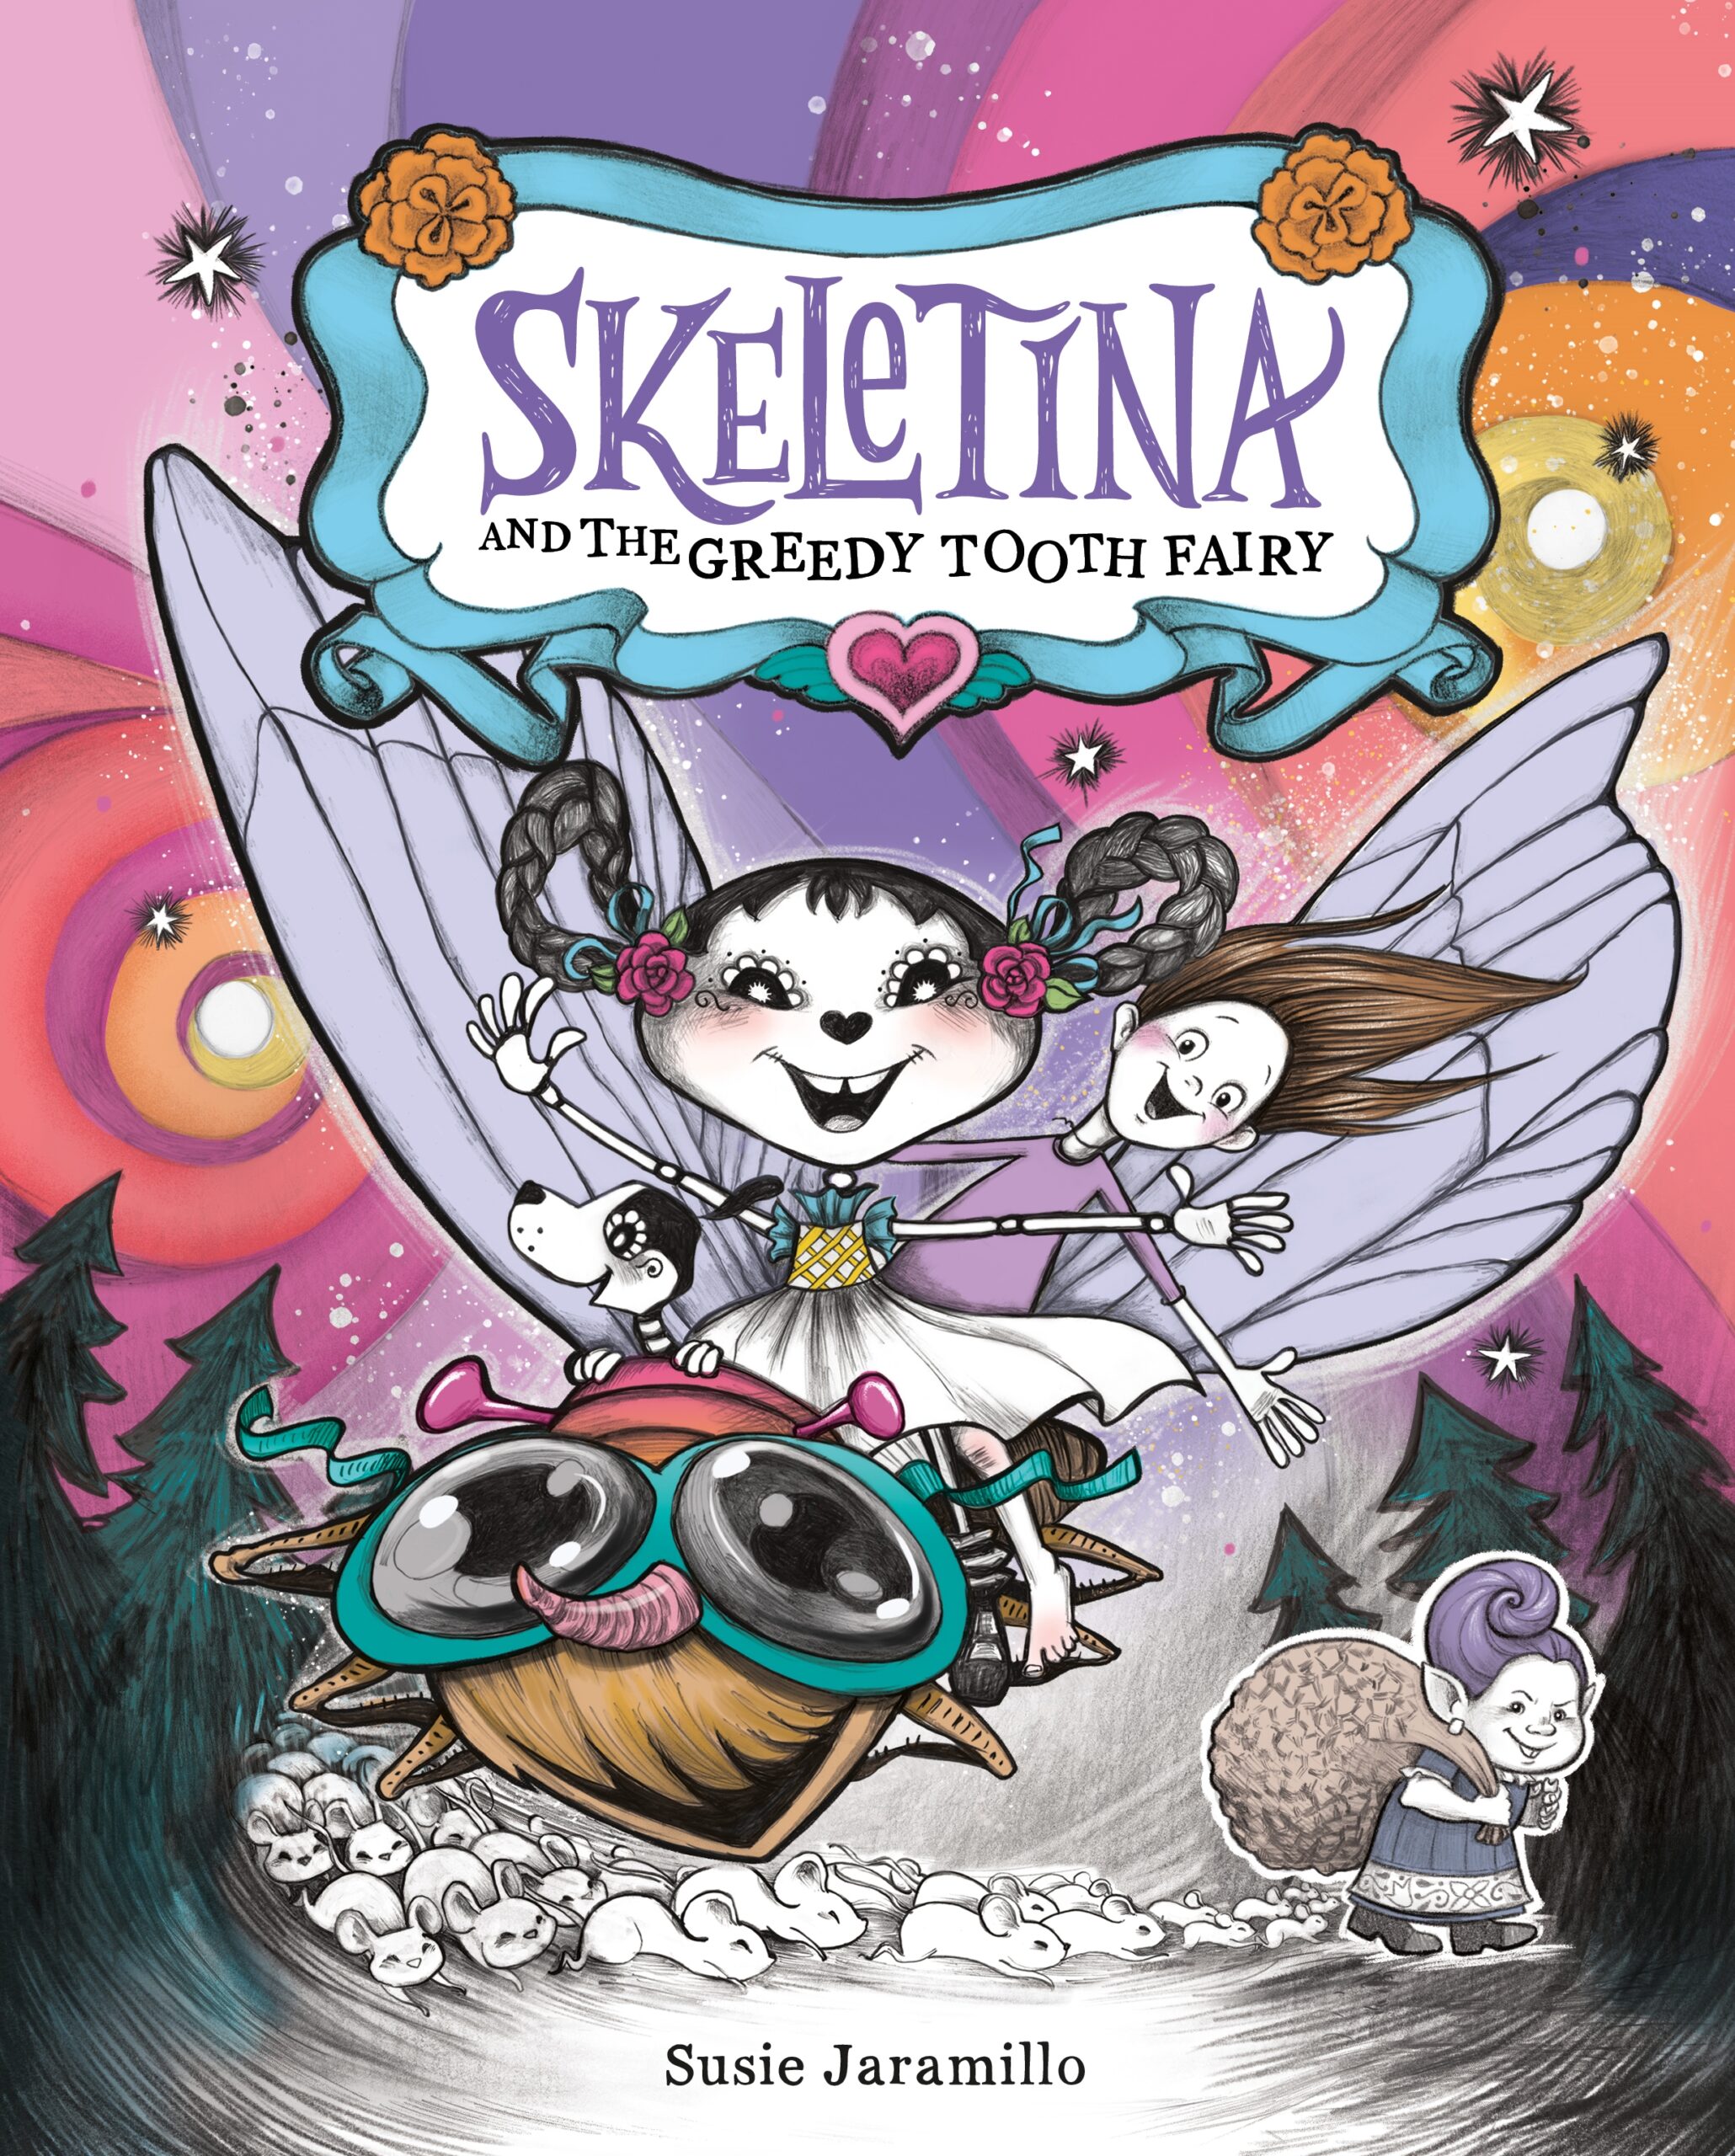 skeletina-and-the-tooth-fairy-9-8